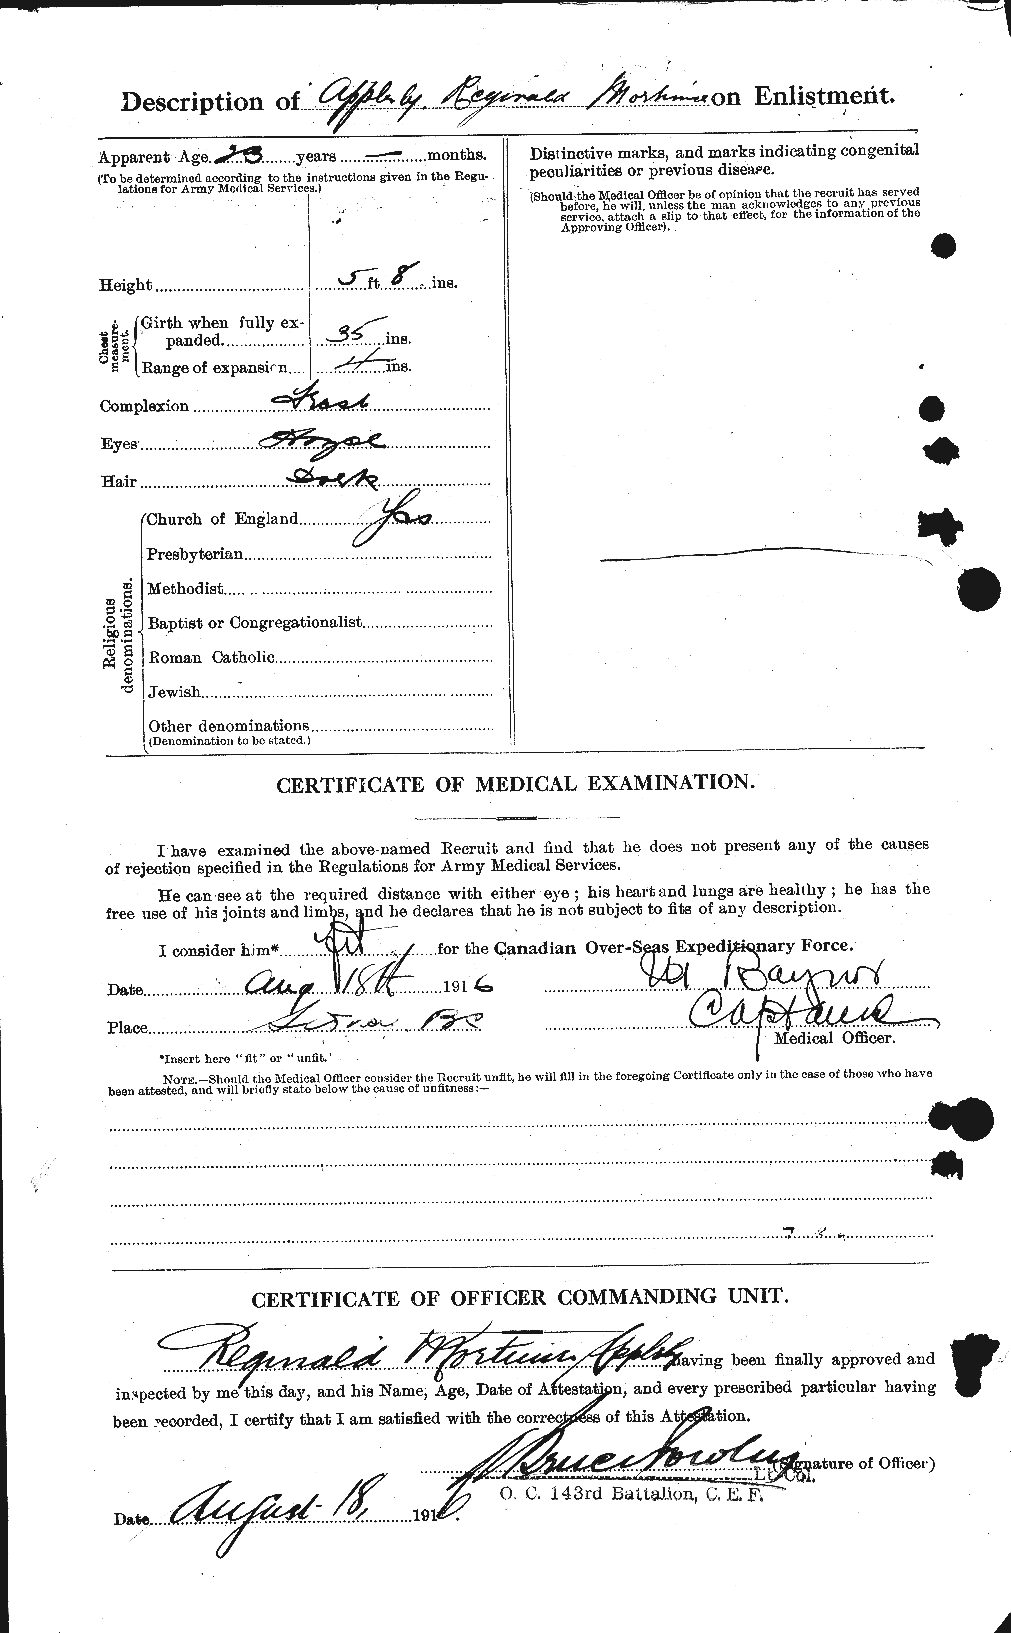 Personnel Records of the First World War - CEF 211350b